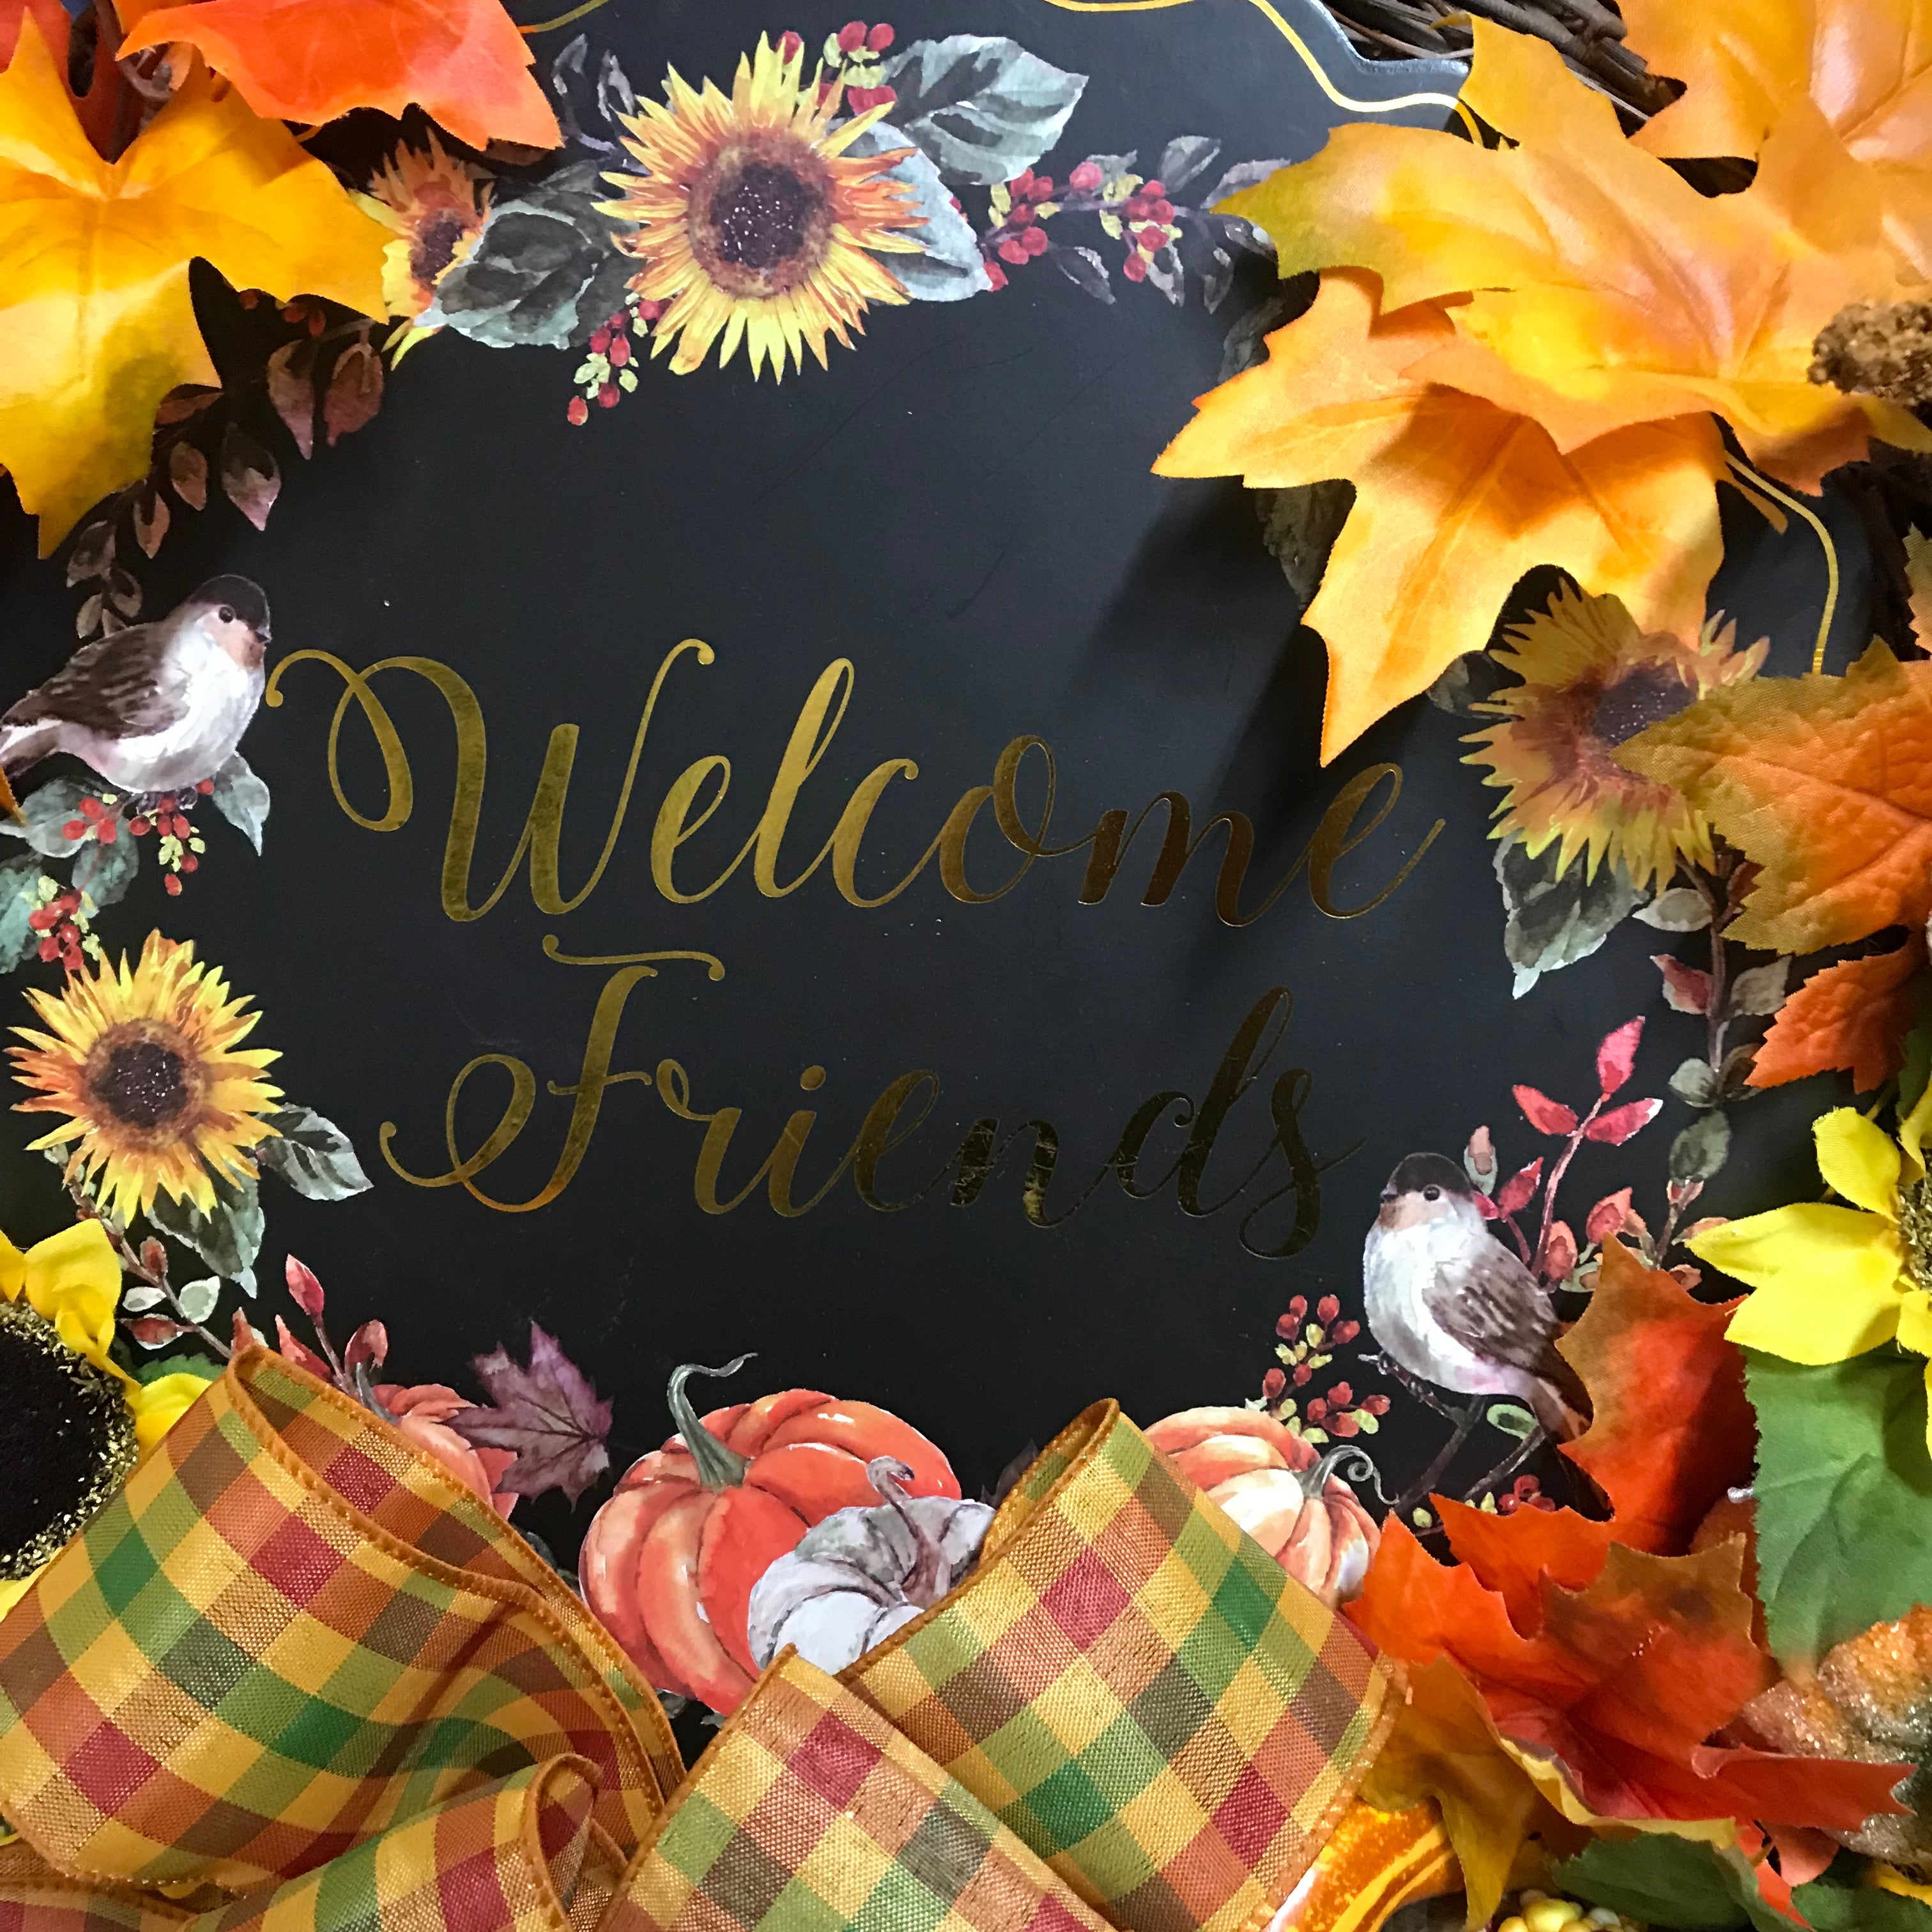 Welcome Friends Fall Plaque Wreath